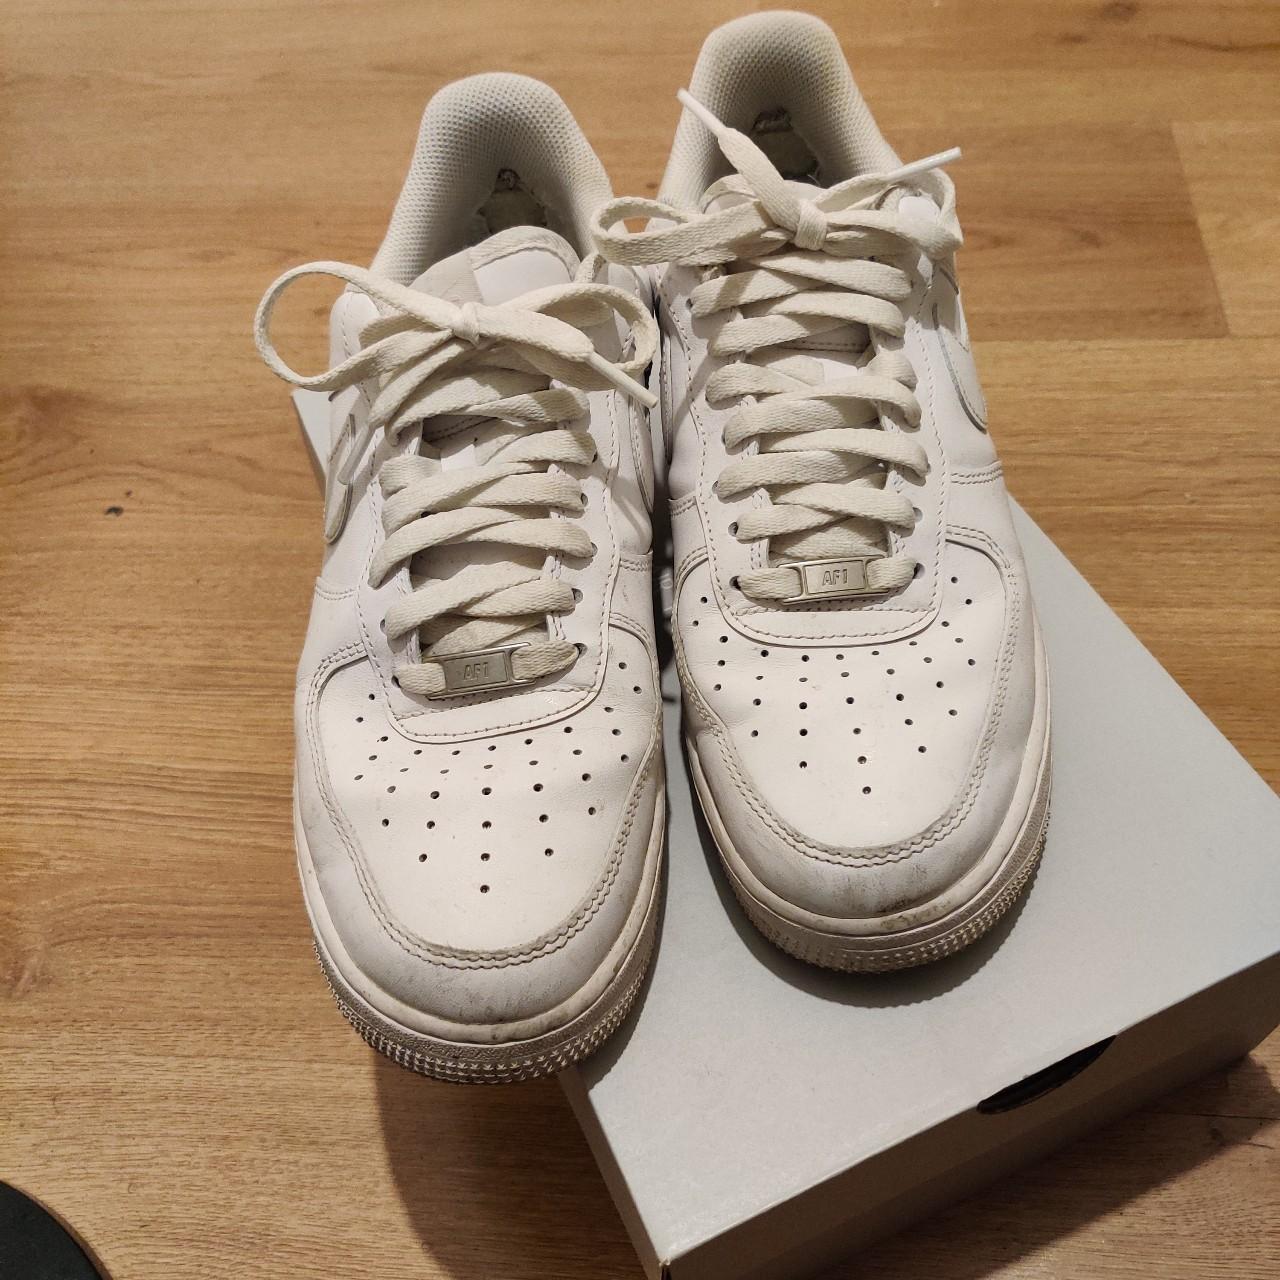 White air force 1s. Comes with box. Worn. - Depop